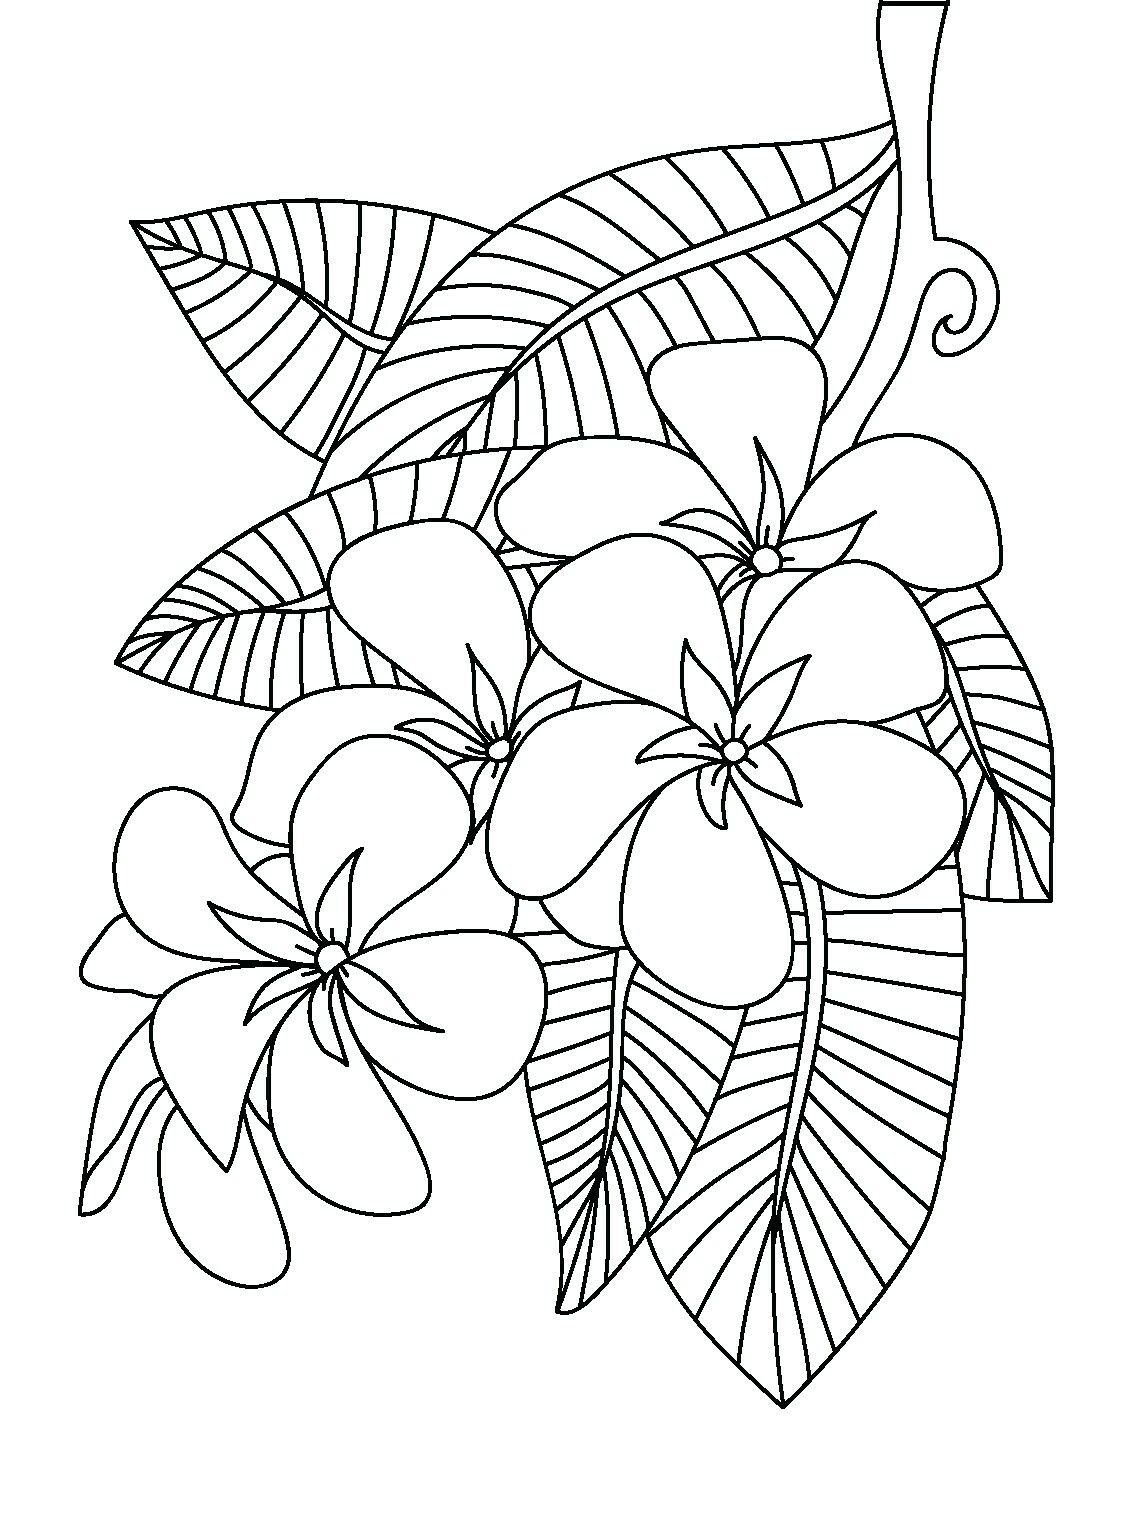 Frangipani coloring page | Flower coloring pages, Mandala coloring pages, Coloring  pages inspirational